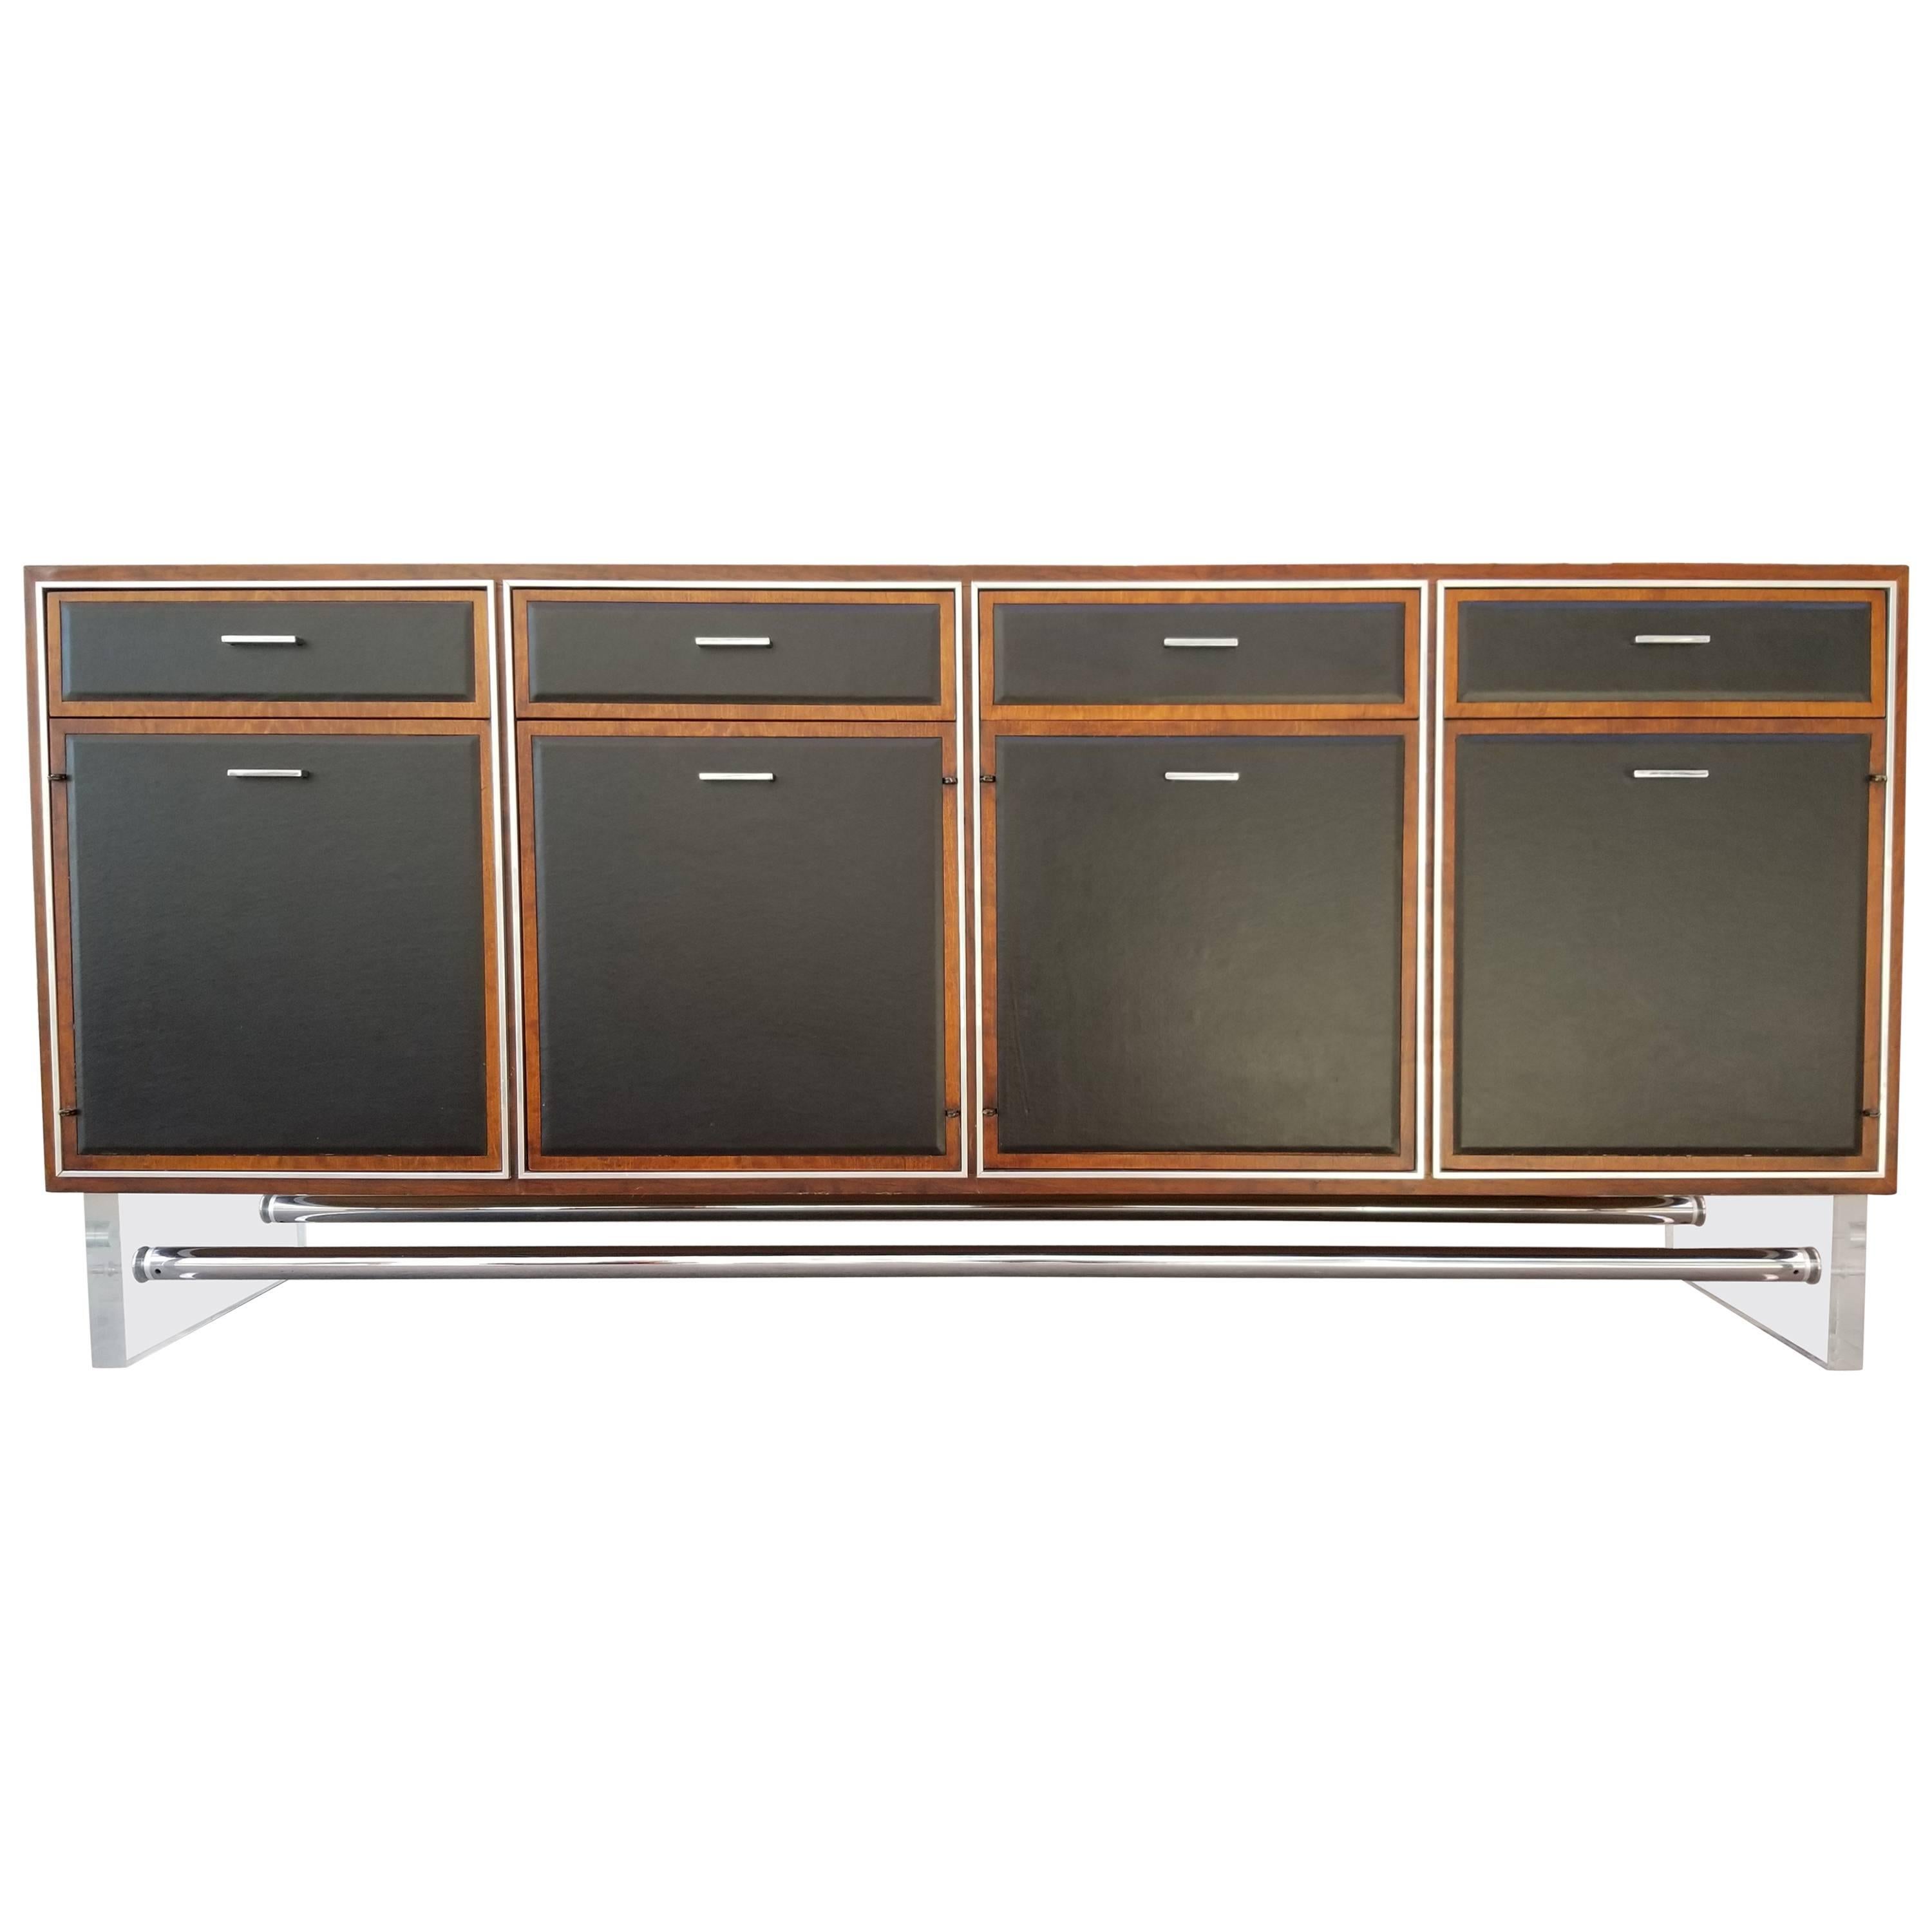 Mid-Century Modern Credenza in Walnut, Lucite, Black Leather and Chrome